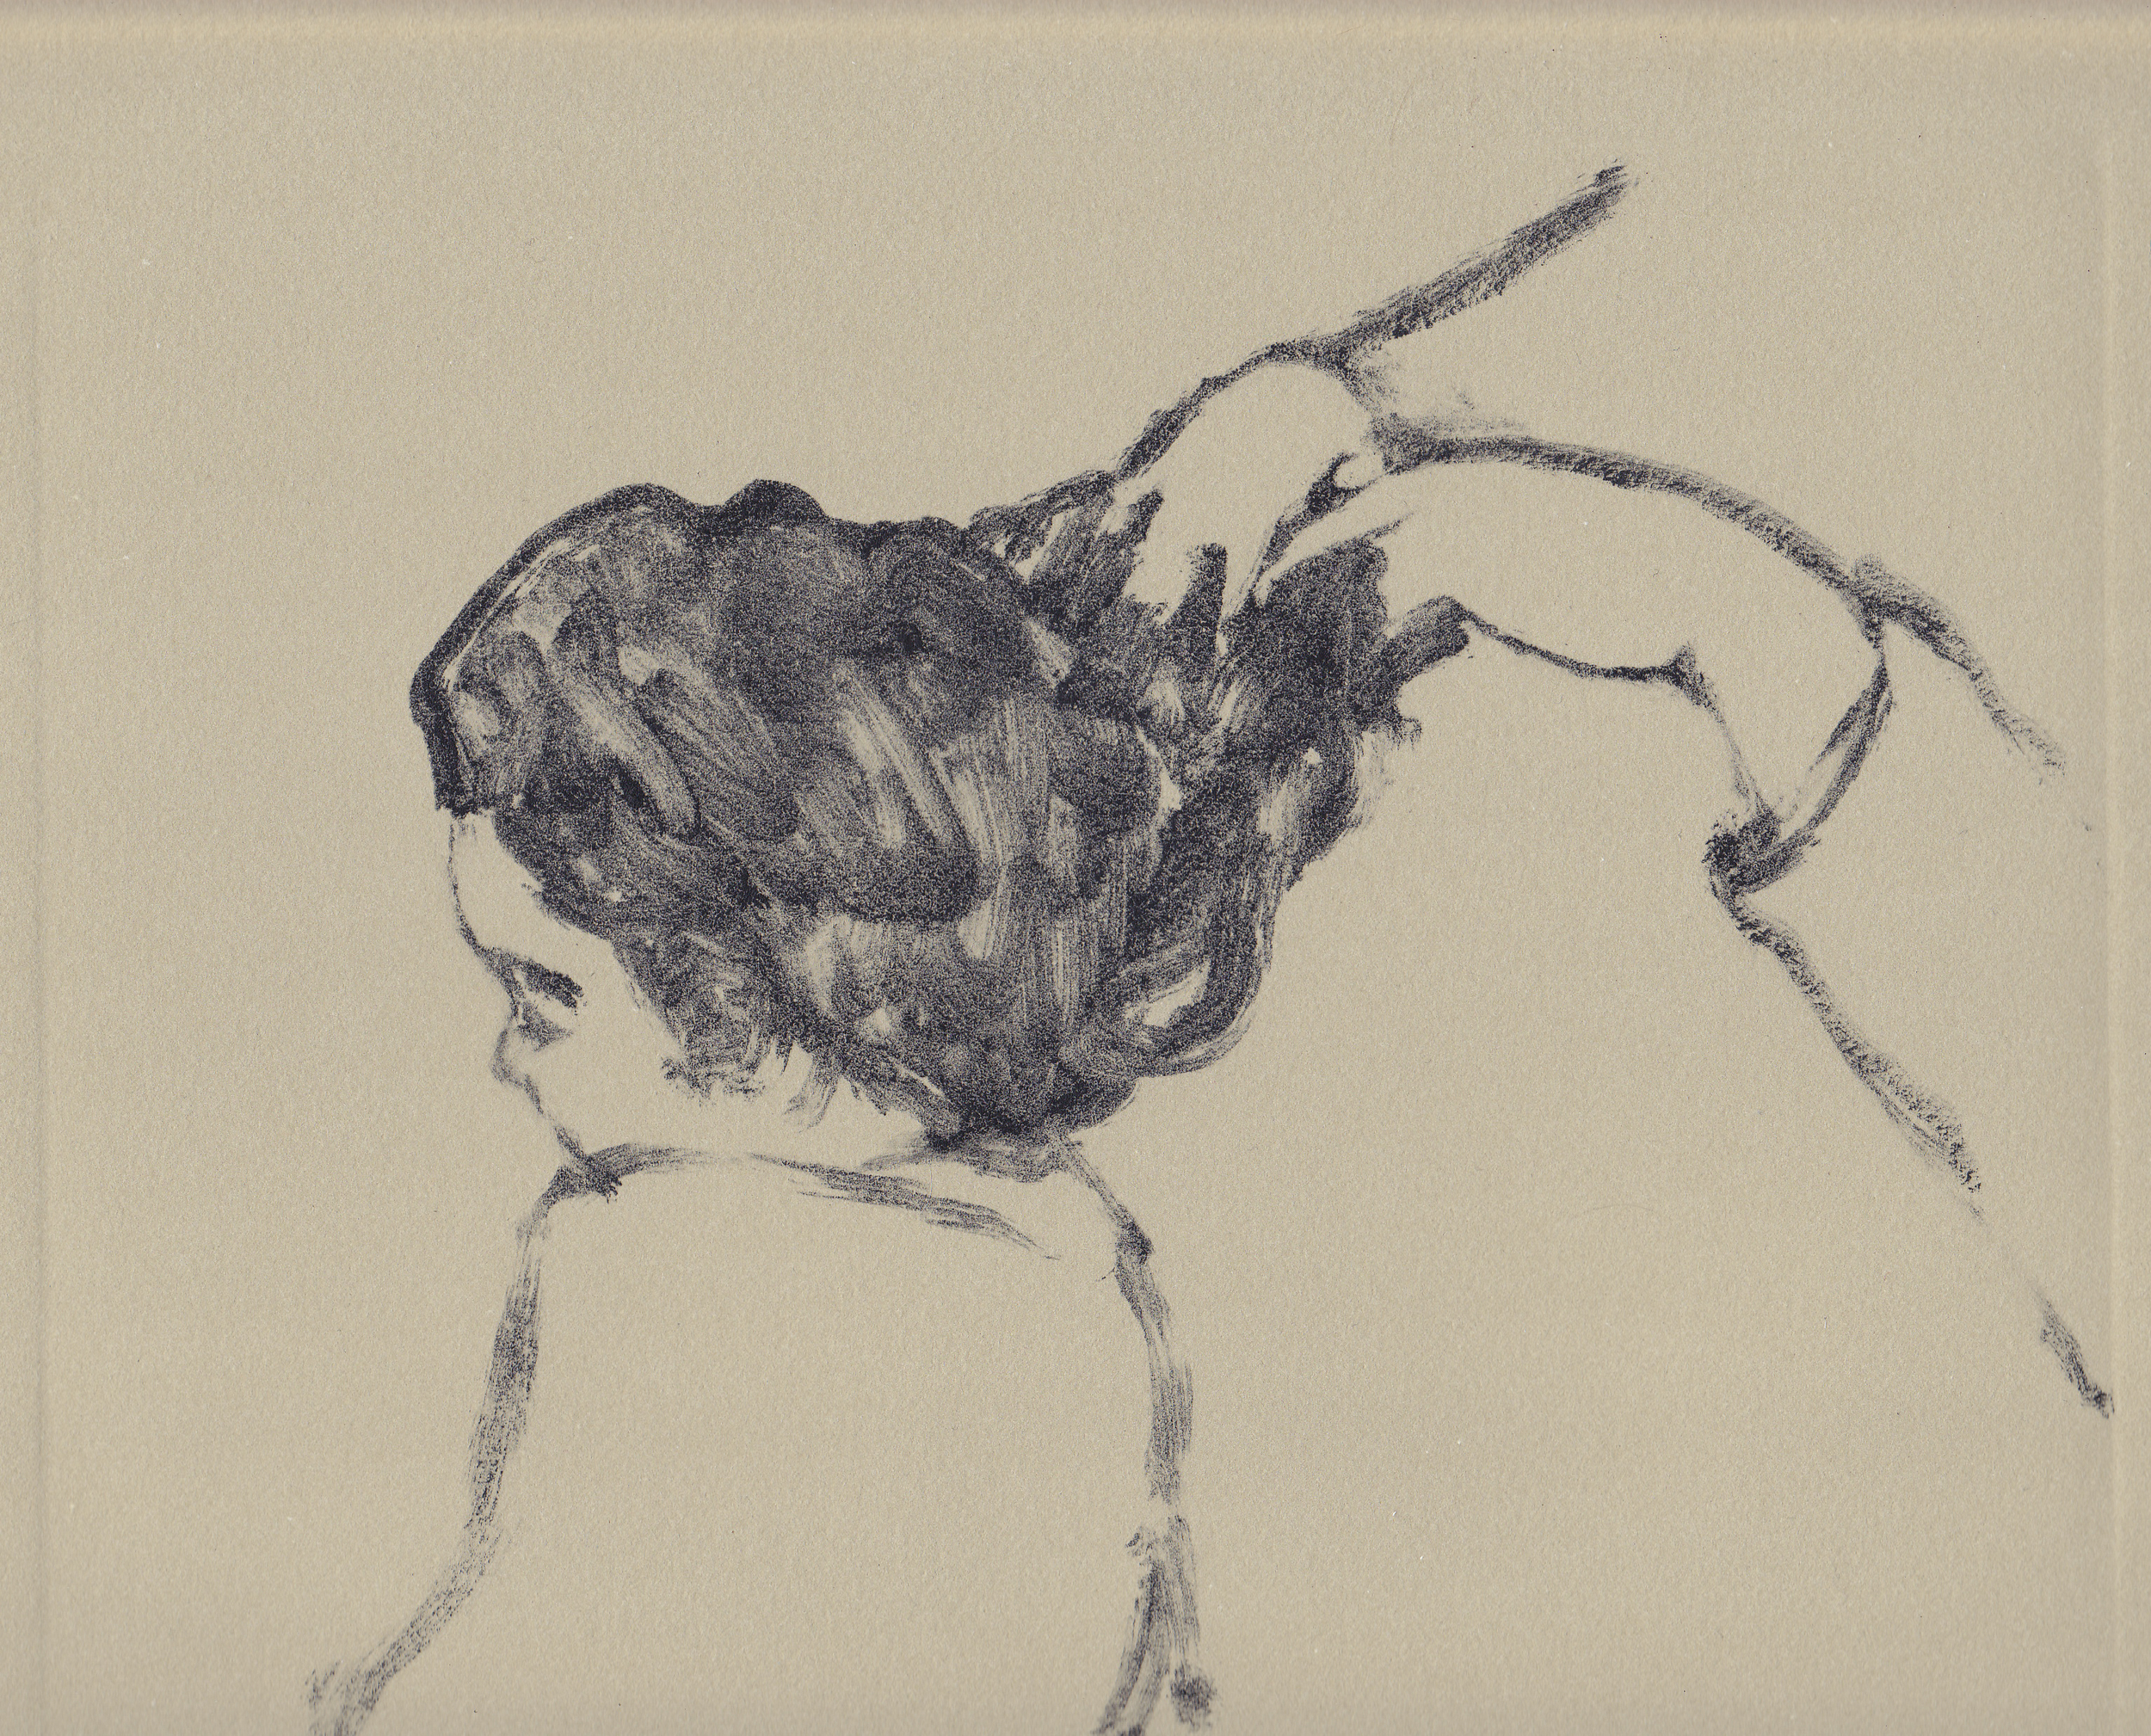   hair   ink on paper  7.5x9.75  2014 